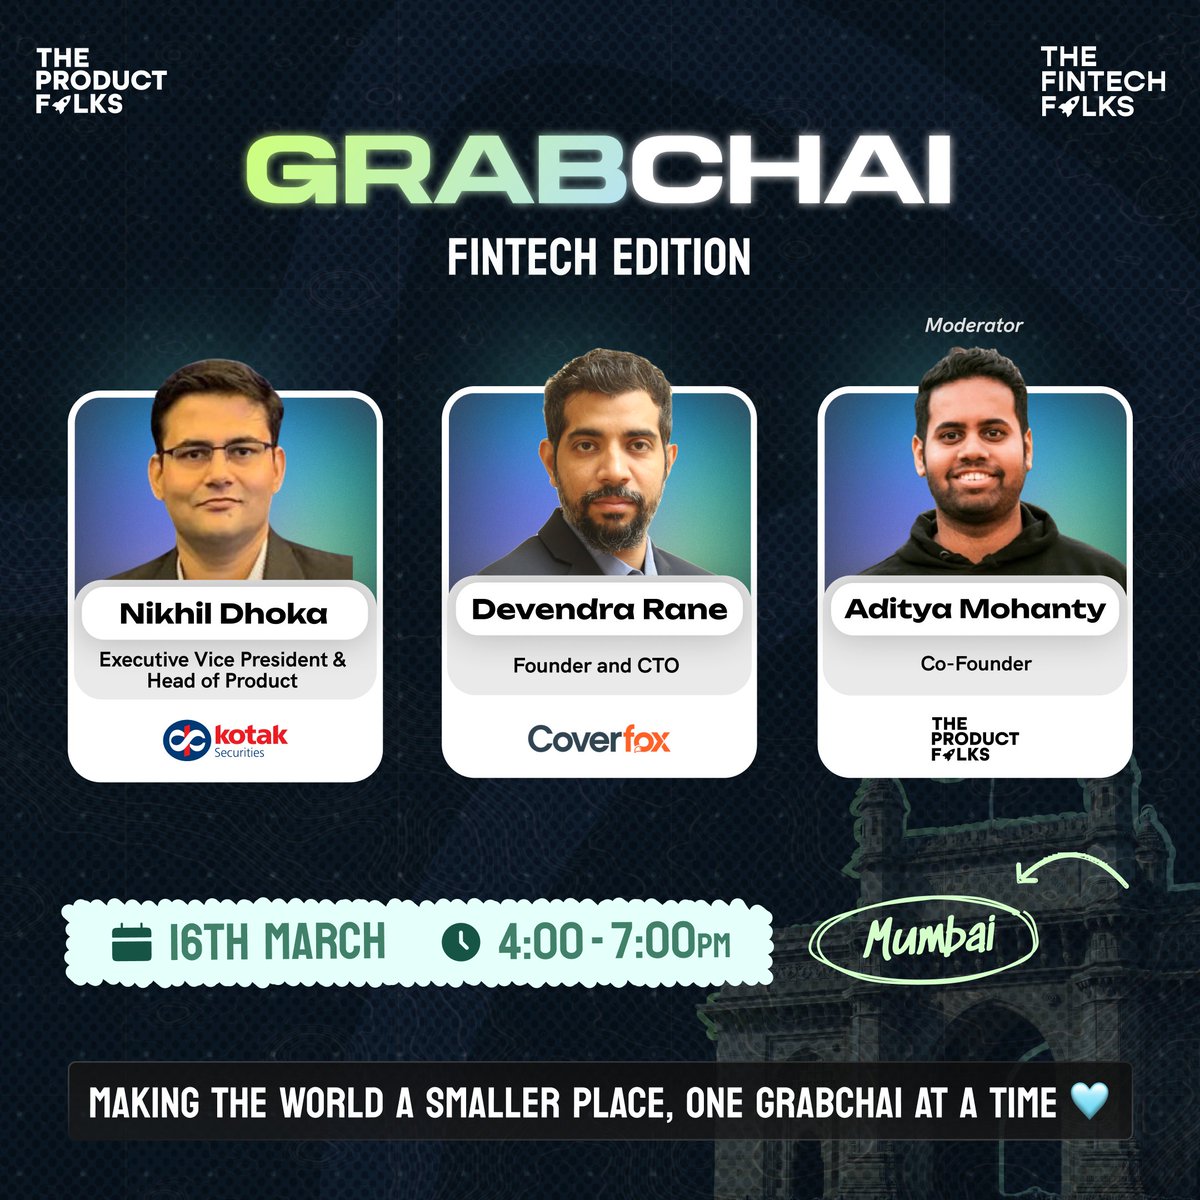 🚀 Mumbai, Fin-Tech it up this weekend with the best product minds ⤵ 📈 Join us in the finance capital for a thrilling mixer with The Fintech Folks & @kotaksecurities! 🥁 Meet our lineup: 👉🏼 Nikhil Dhoka, EVP of Product at @kotaksecurities (ex-Paytm) 👉🏼 Devendra Rane,